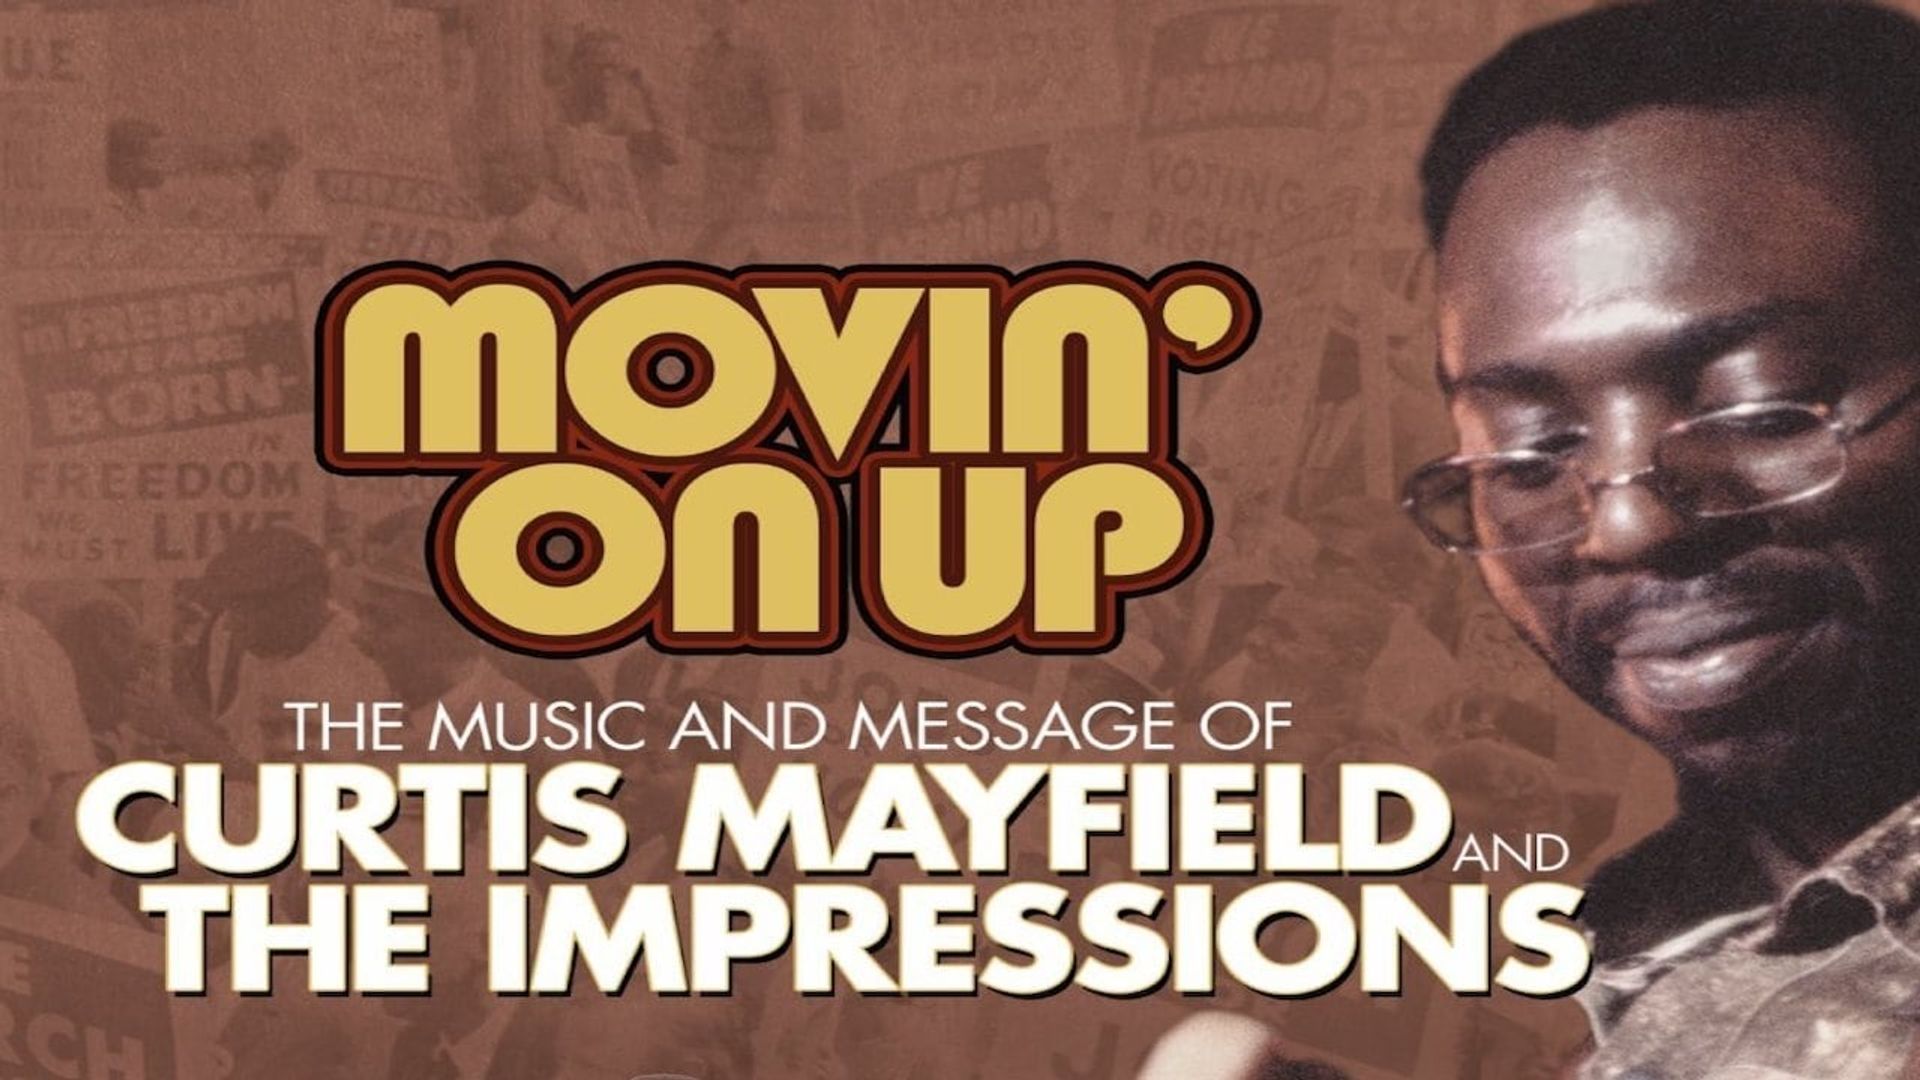 Movin' on Up: The Music and Message of Curtis Mayfield and the Impressions background